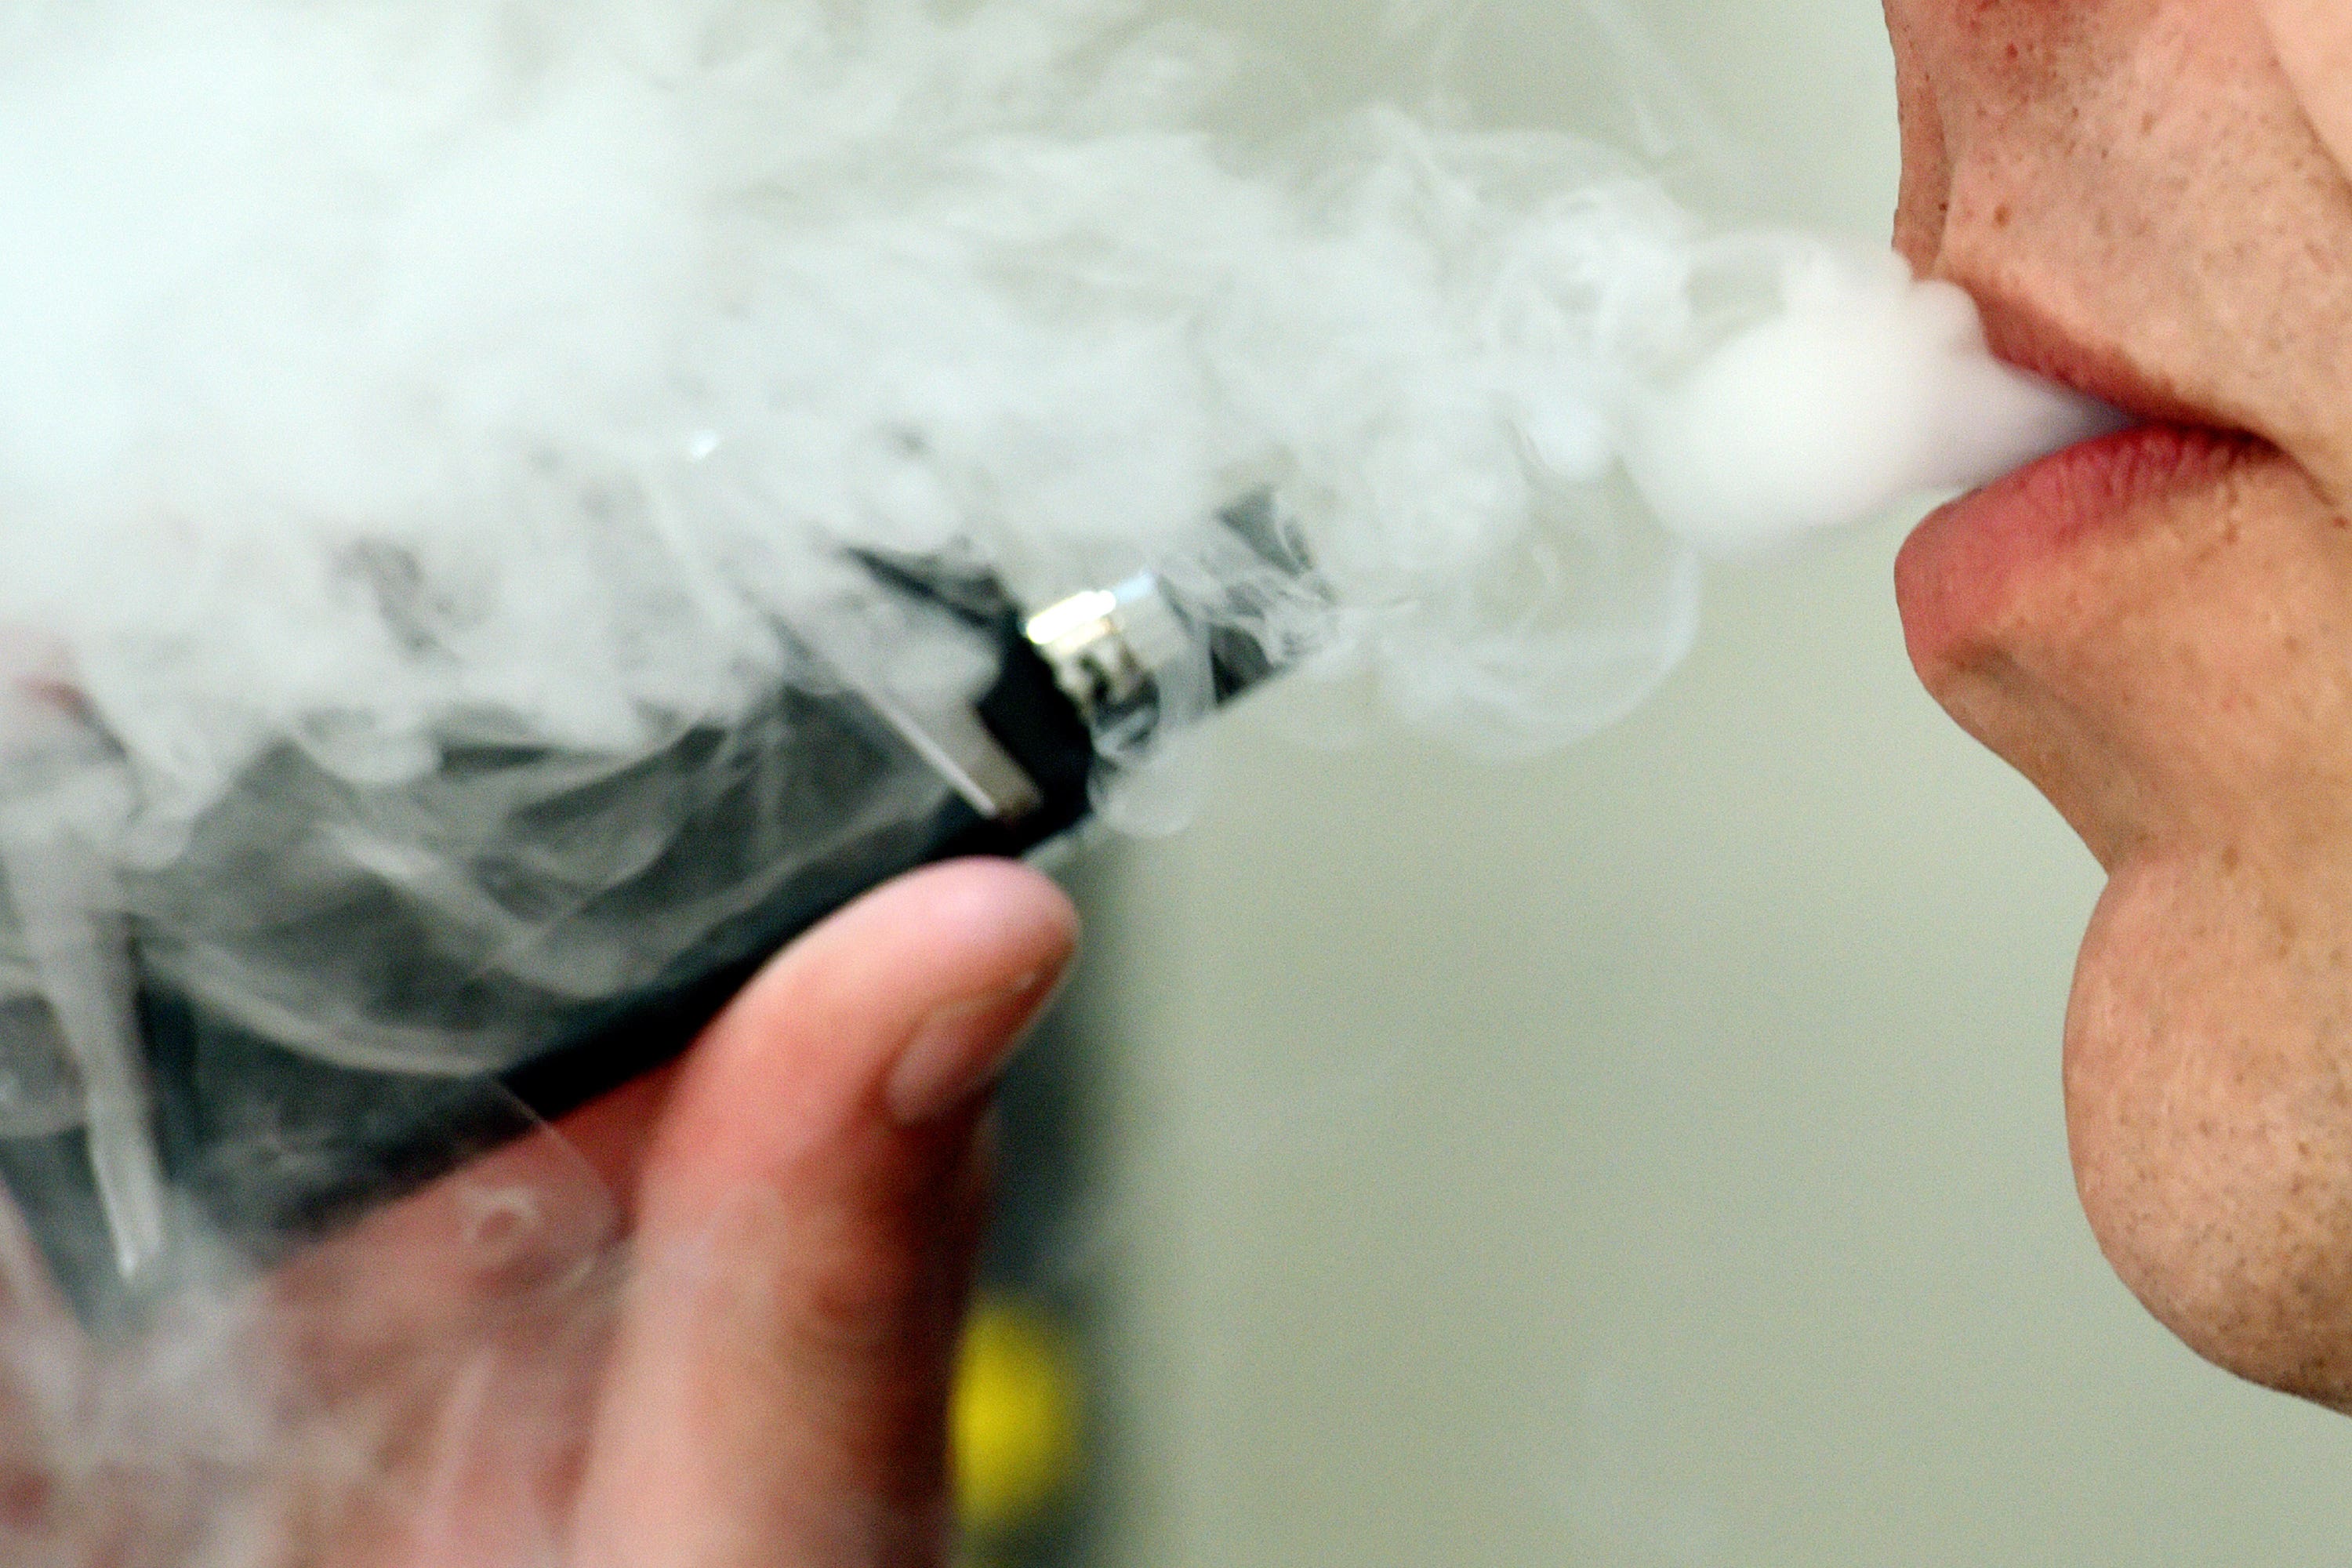 Schools forced to take action in toilets due to child vaping, MPs hear | The Independent